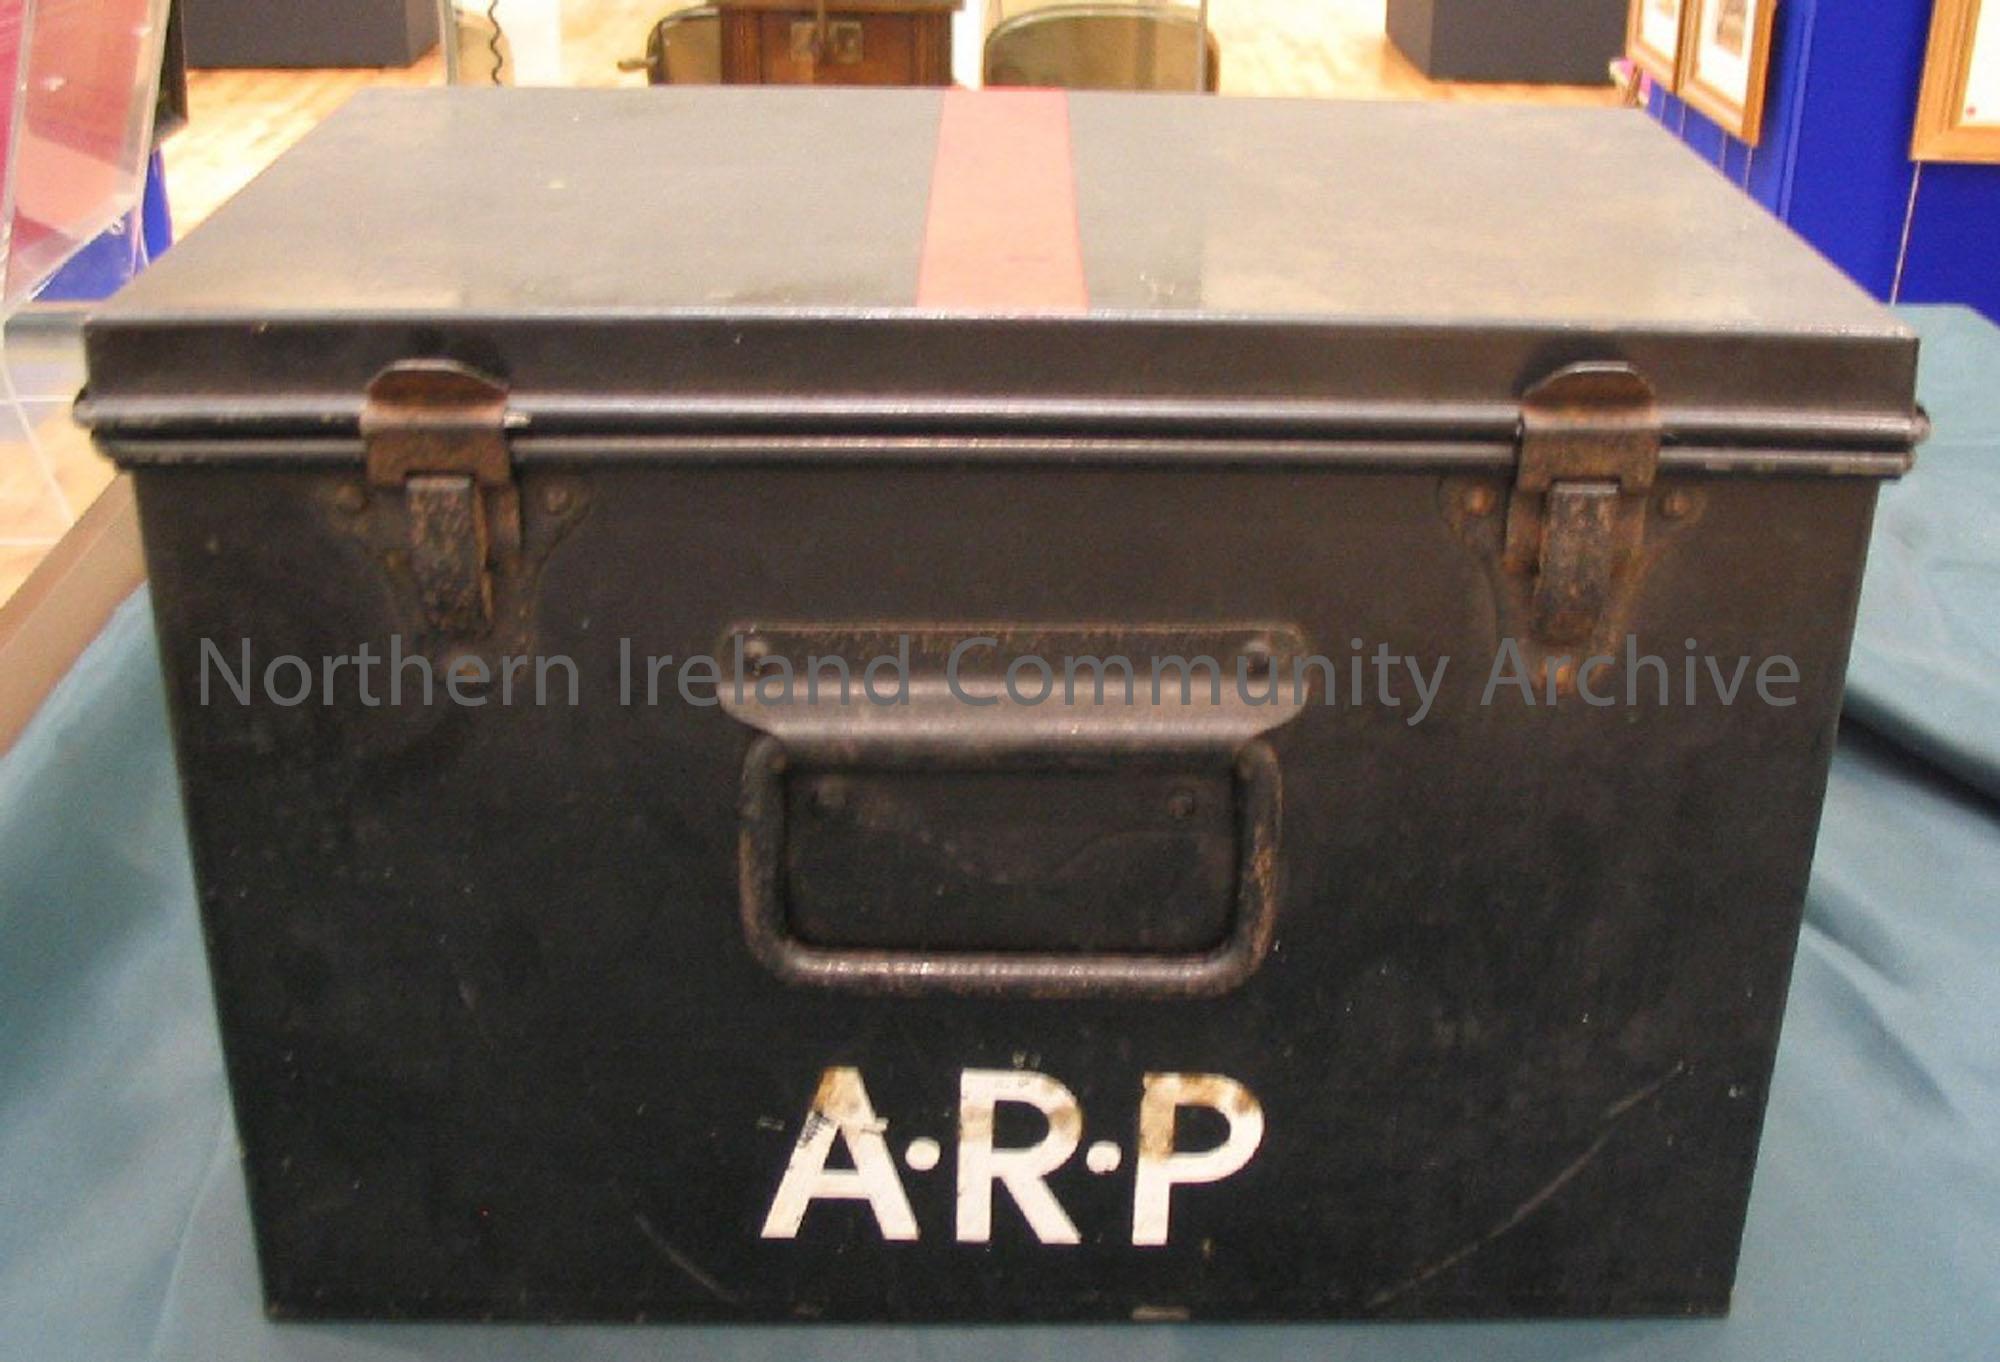 Air raid precaution equipment box. Box with hinged lid on top, coloured black with a red stripe on the lid and ARP written on side.